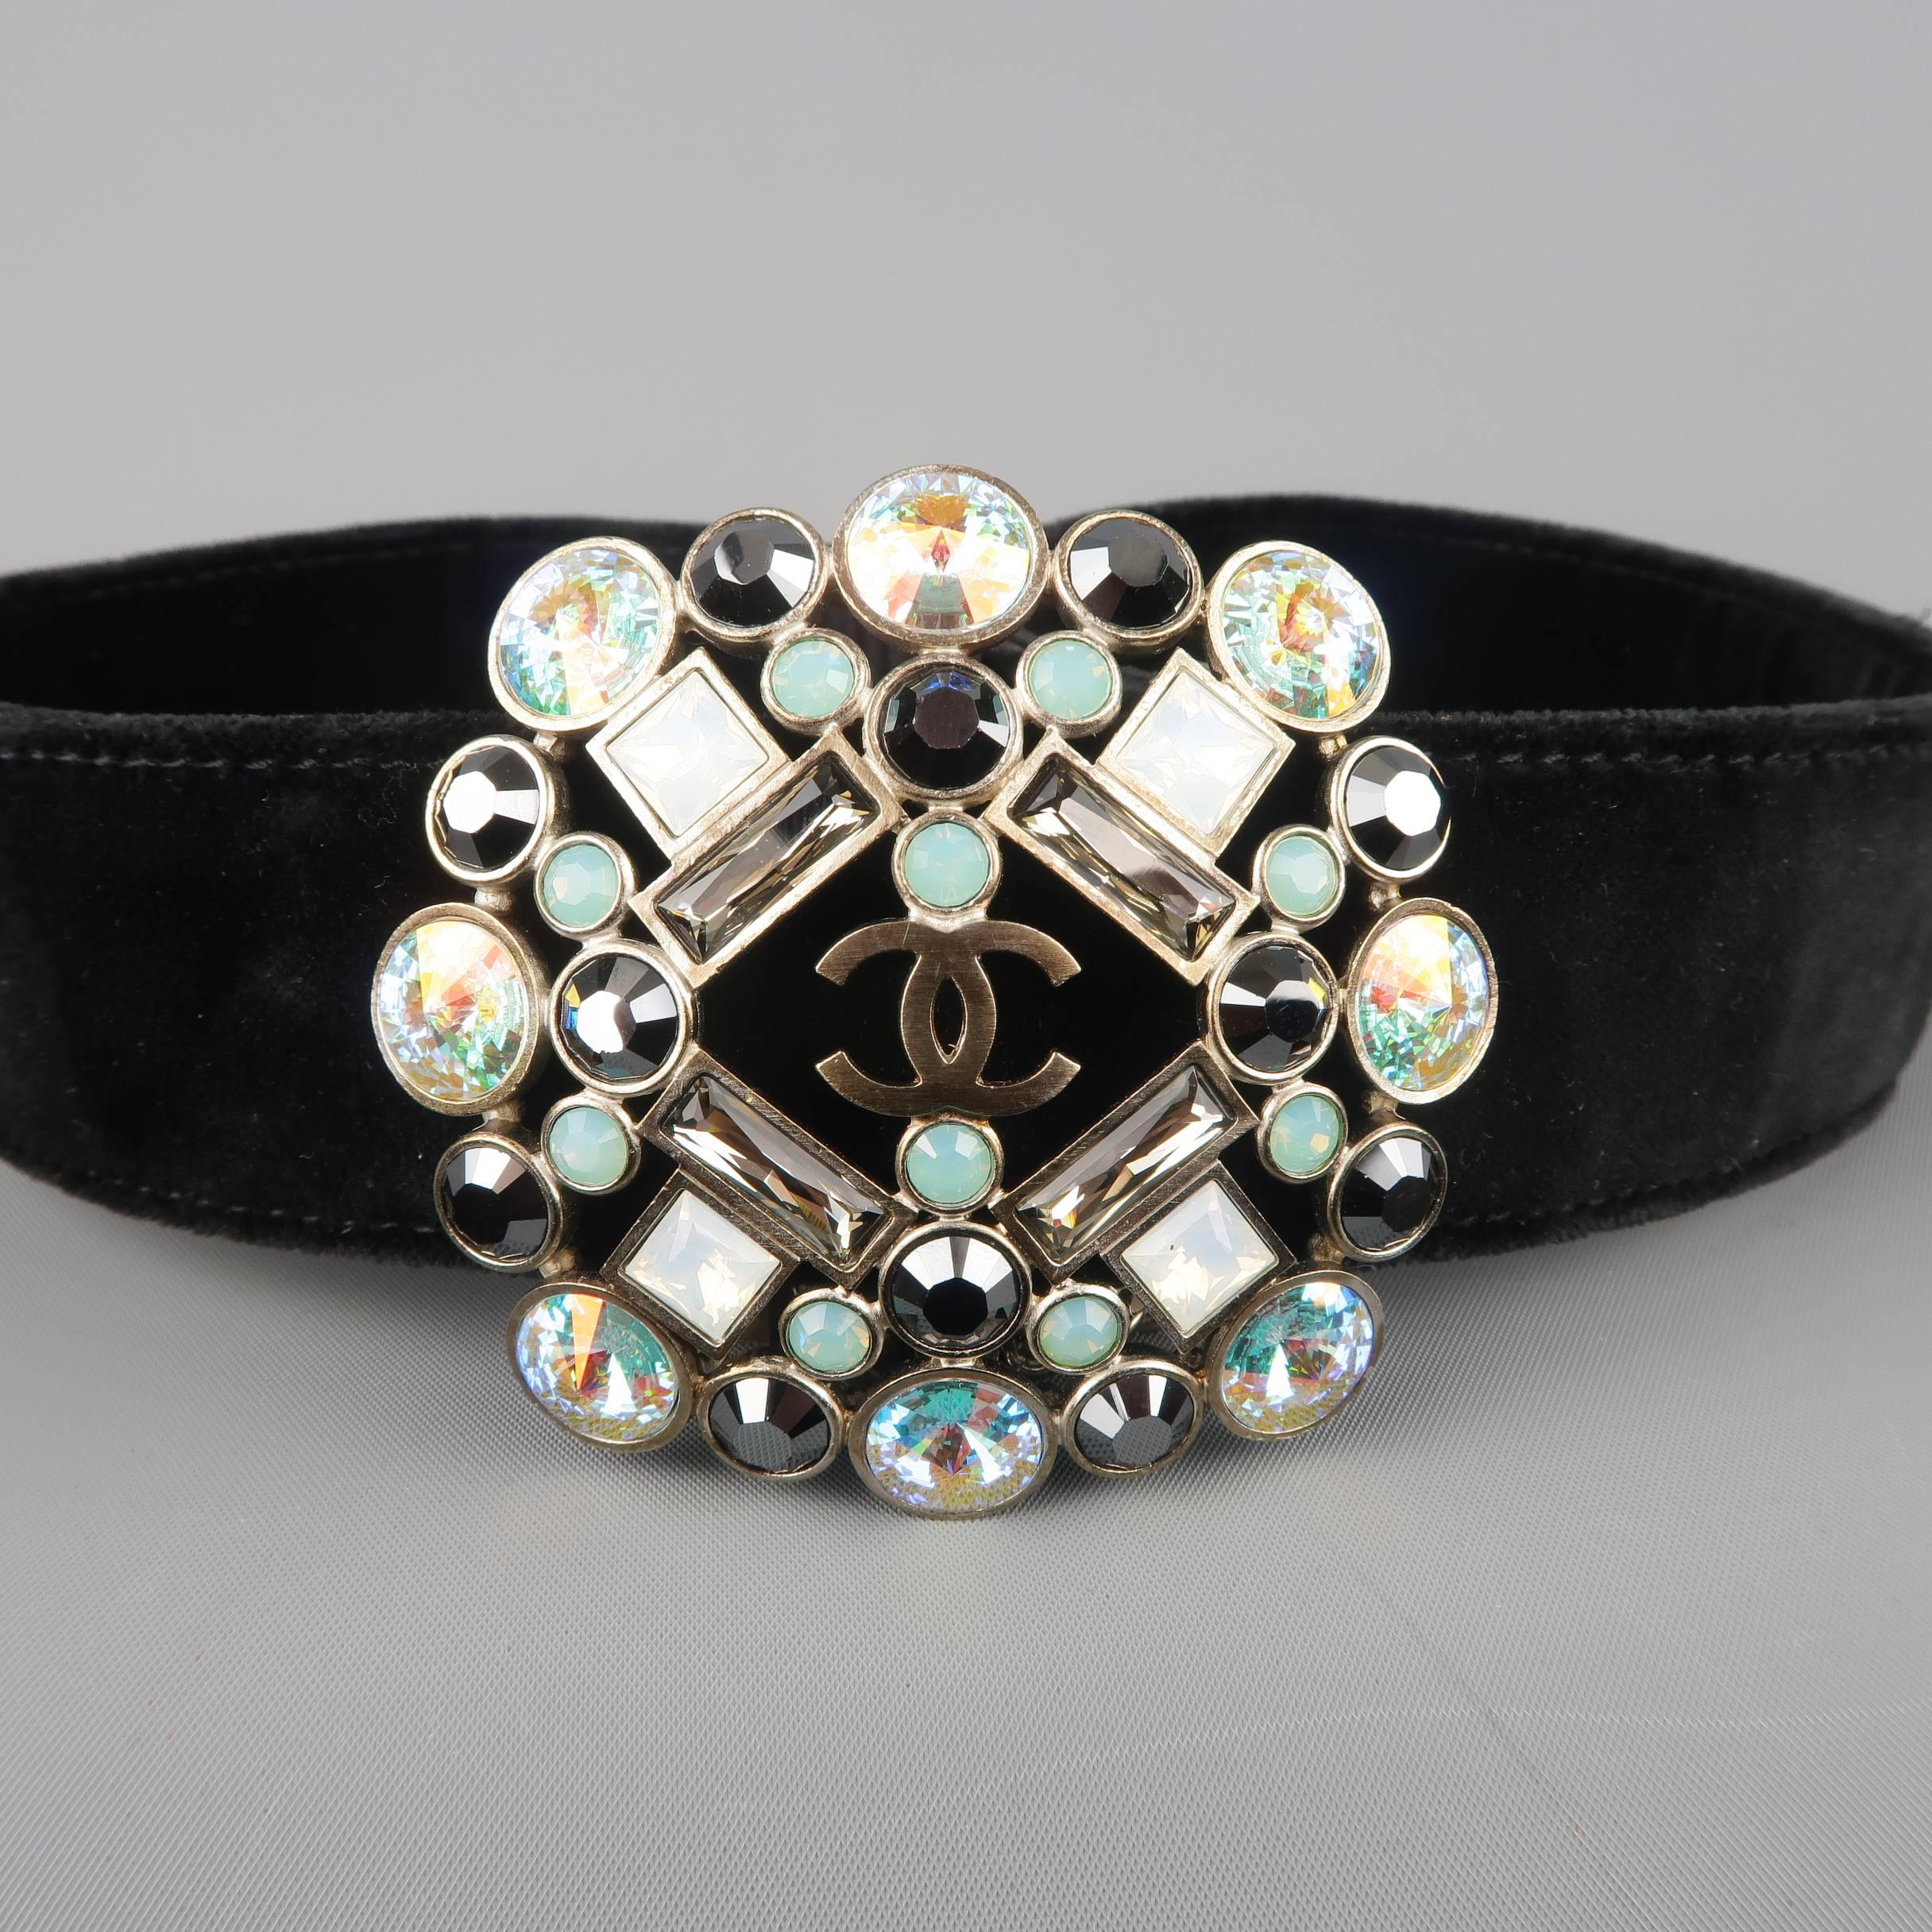 This gorgeous CHANEL statement belt from Fall Winter 2006 Collection features a black velvet strap, chain clasp closure with charm, and oversized Aurora Borealis crystal Gripoix CC brooch motif. Made in France.
 
Good Pre-Owned Condition.
Marked: